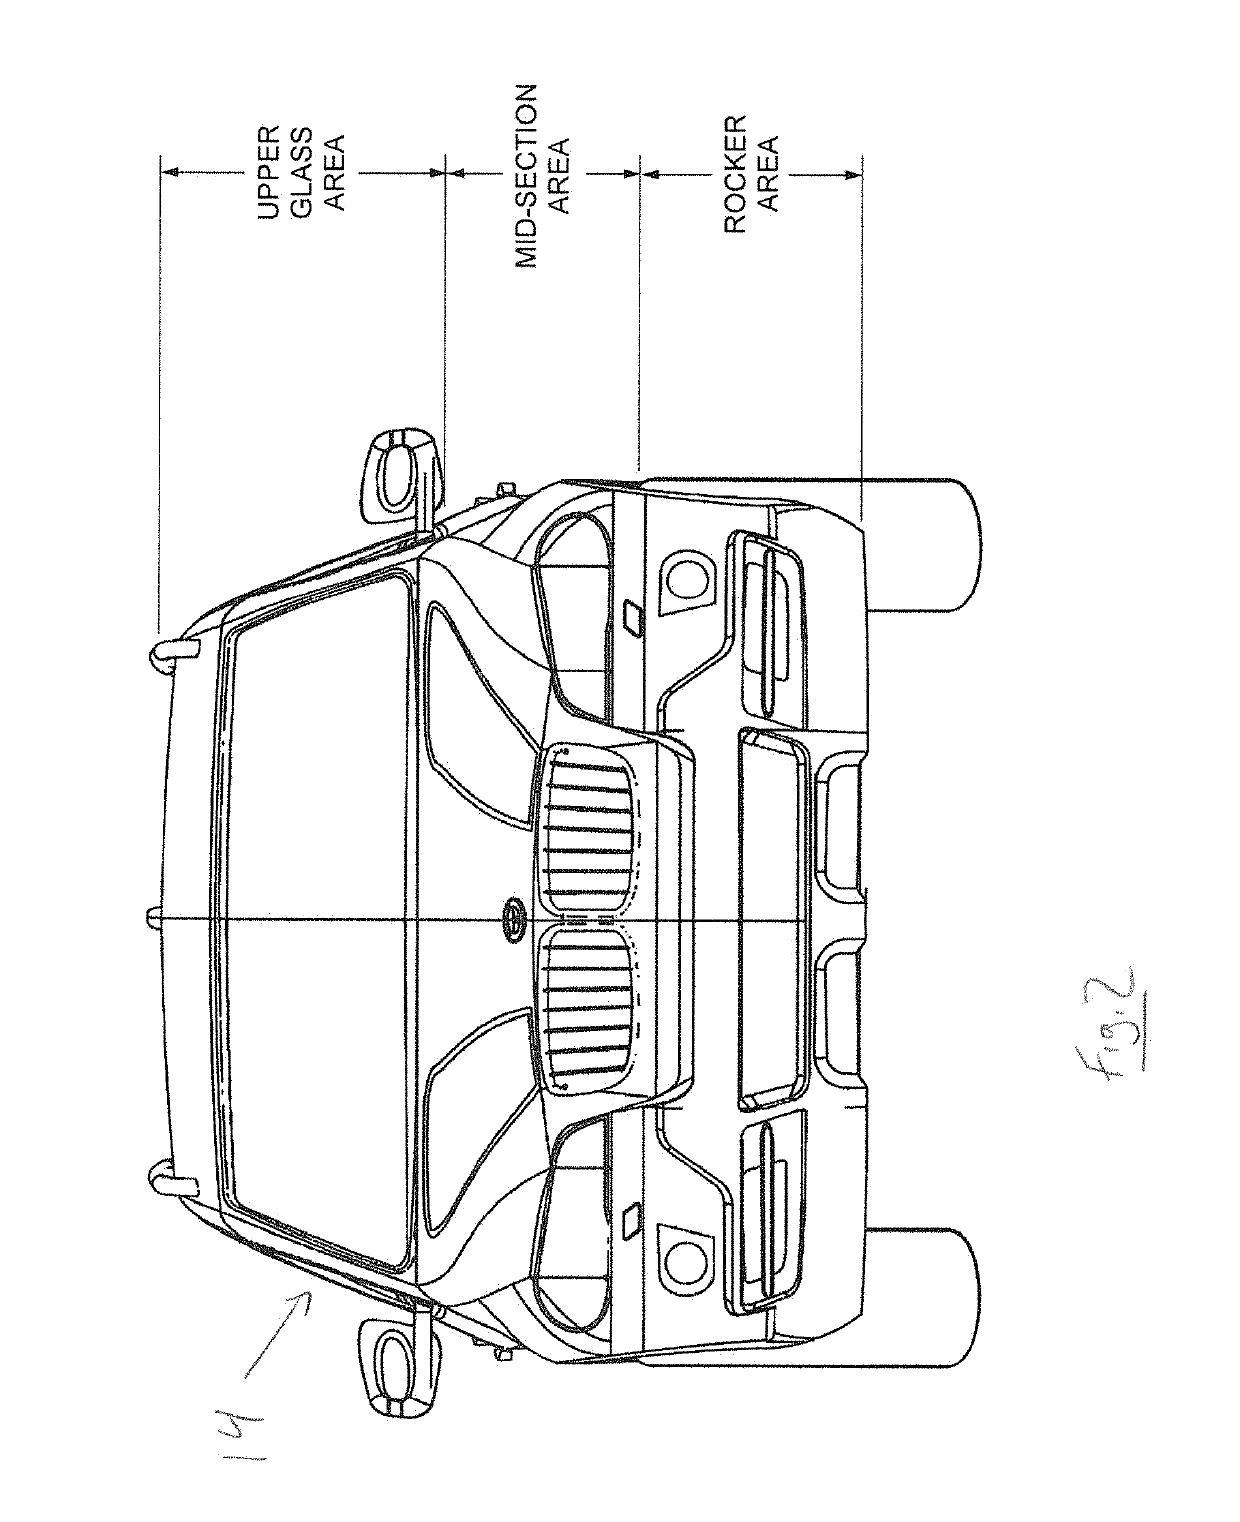 Vehicle wash system with pivoting side brushes and method for avoiding vehicle side mirrors